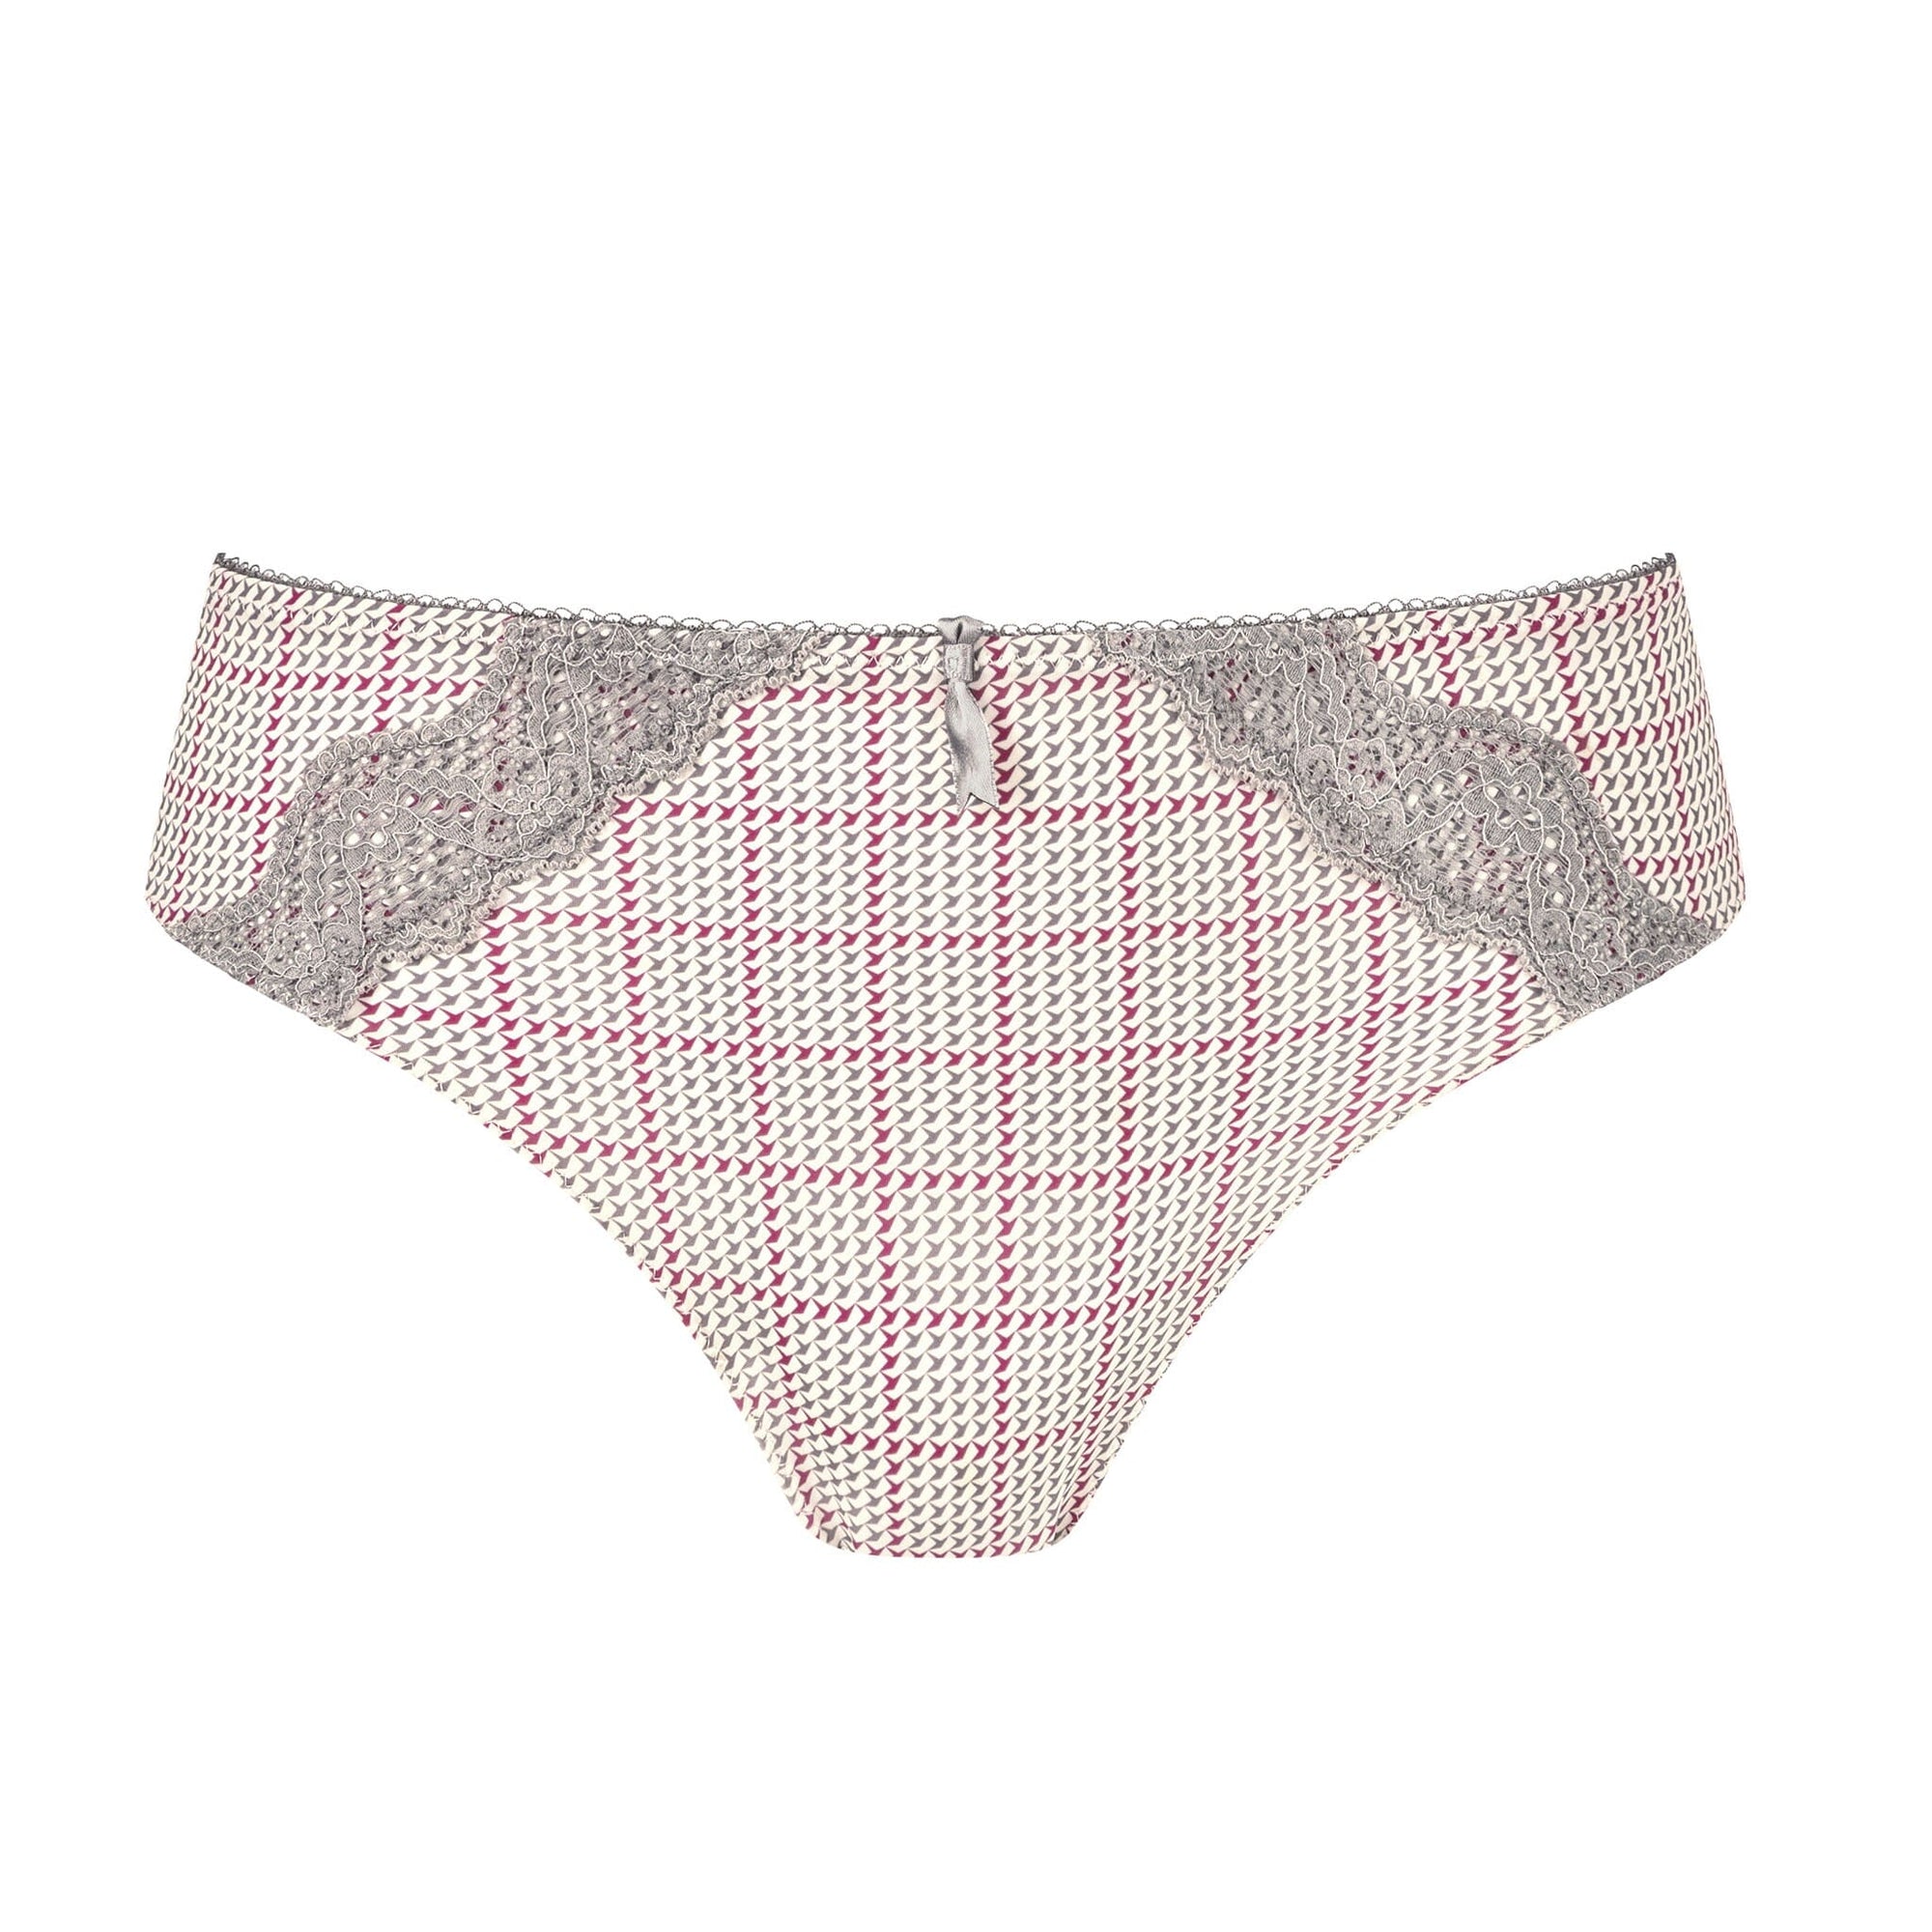 Amoena® Luna Panty Shown in Grey/Multi. Front View.